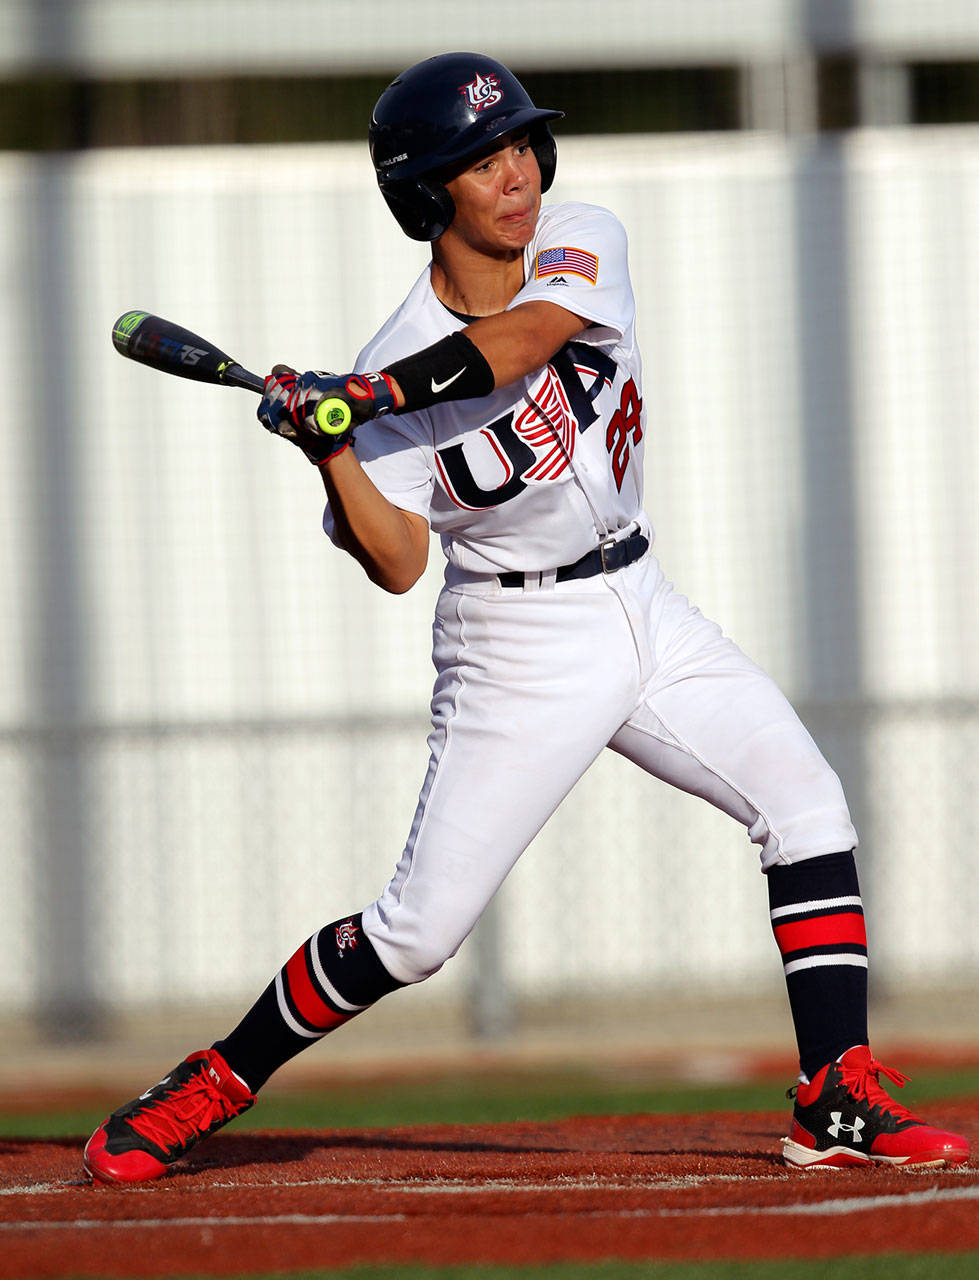 Aberdeen’s Kai Halstead takes a swing during the 12-and-under Pan Am baseball championship in Aguascalientes, Mexico in August. Halstead was named as the top batter for the tournament with a .667 average and six home runs. (Photo courtesy of USA Baseball)